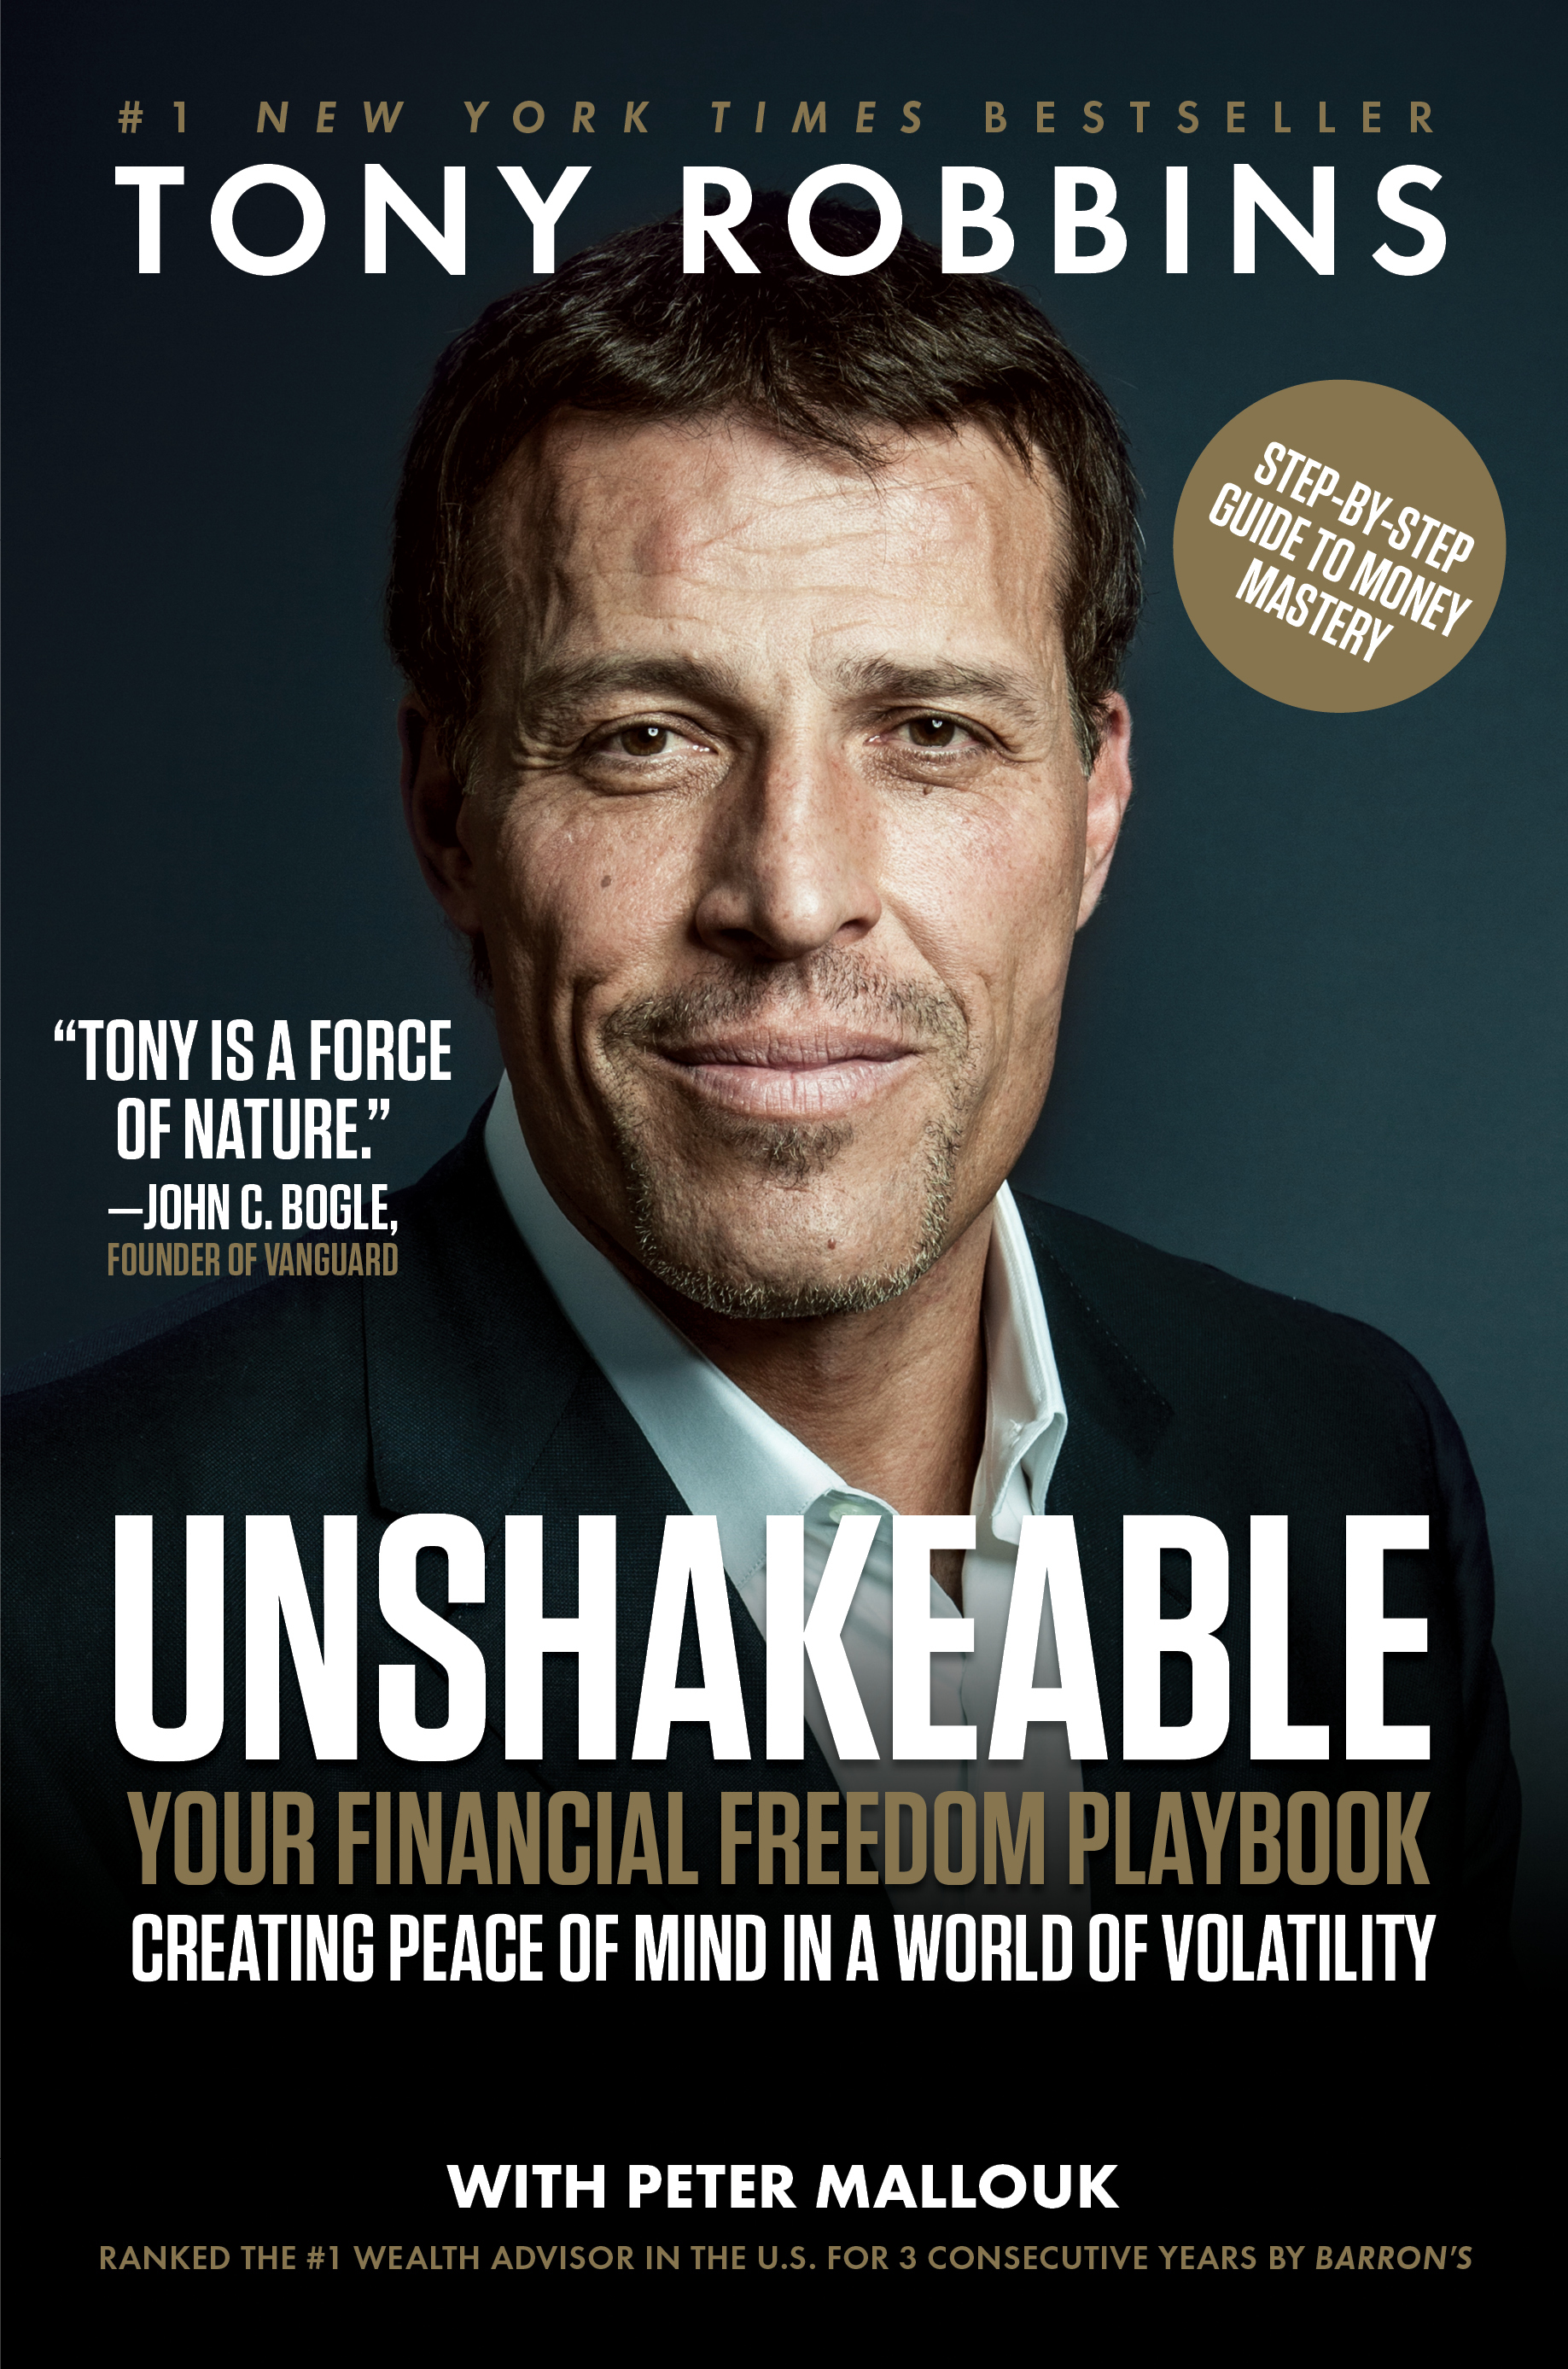 anthony robbins the ultimate business mastery system